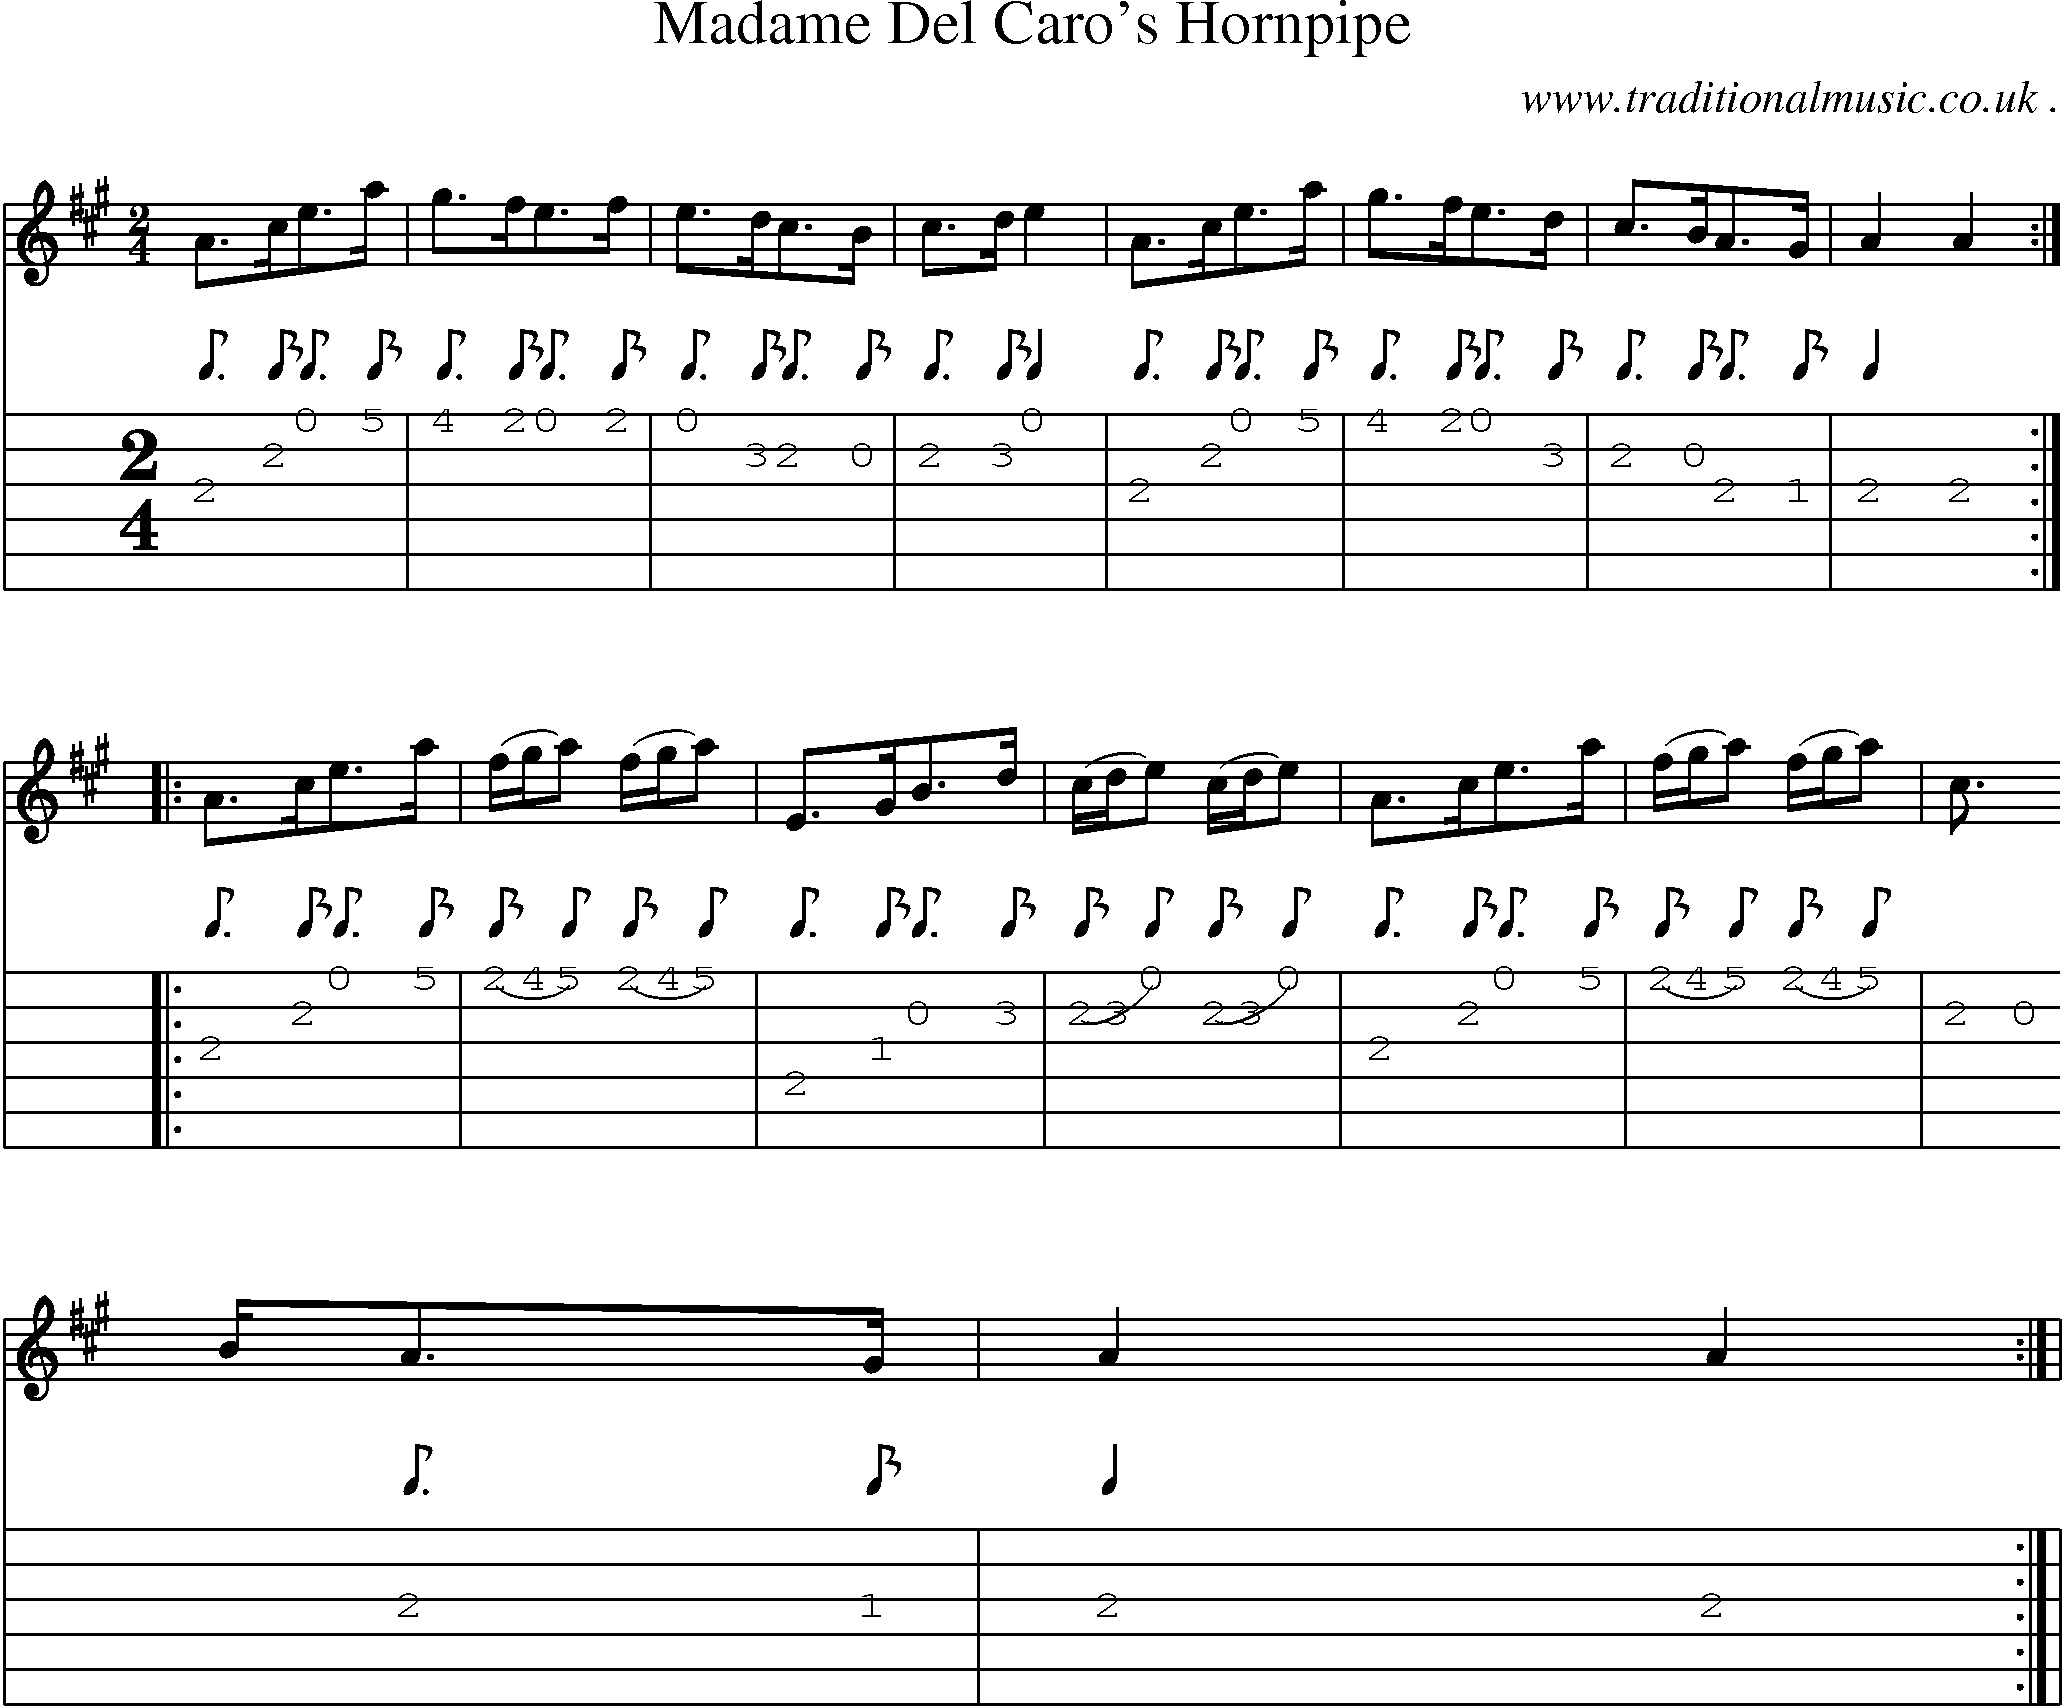 Sheet-Music and Guitar Tabs for Madame Del Caros Hornpipe